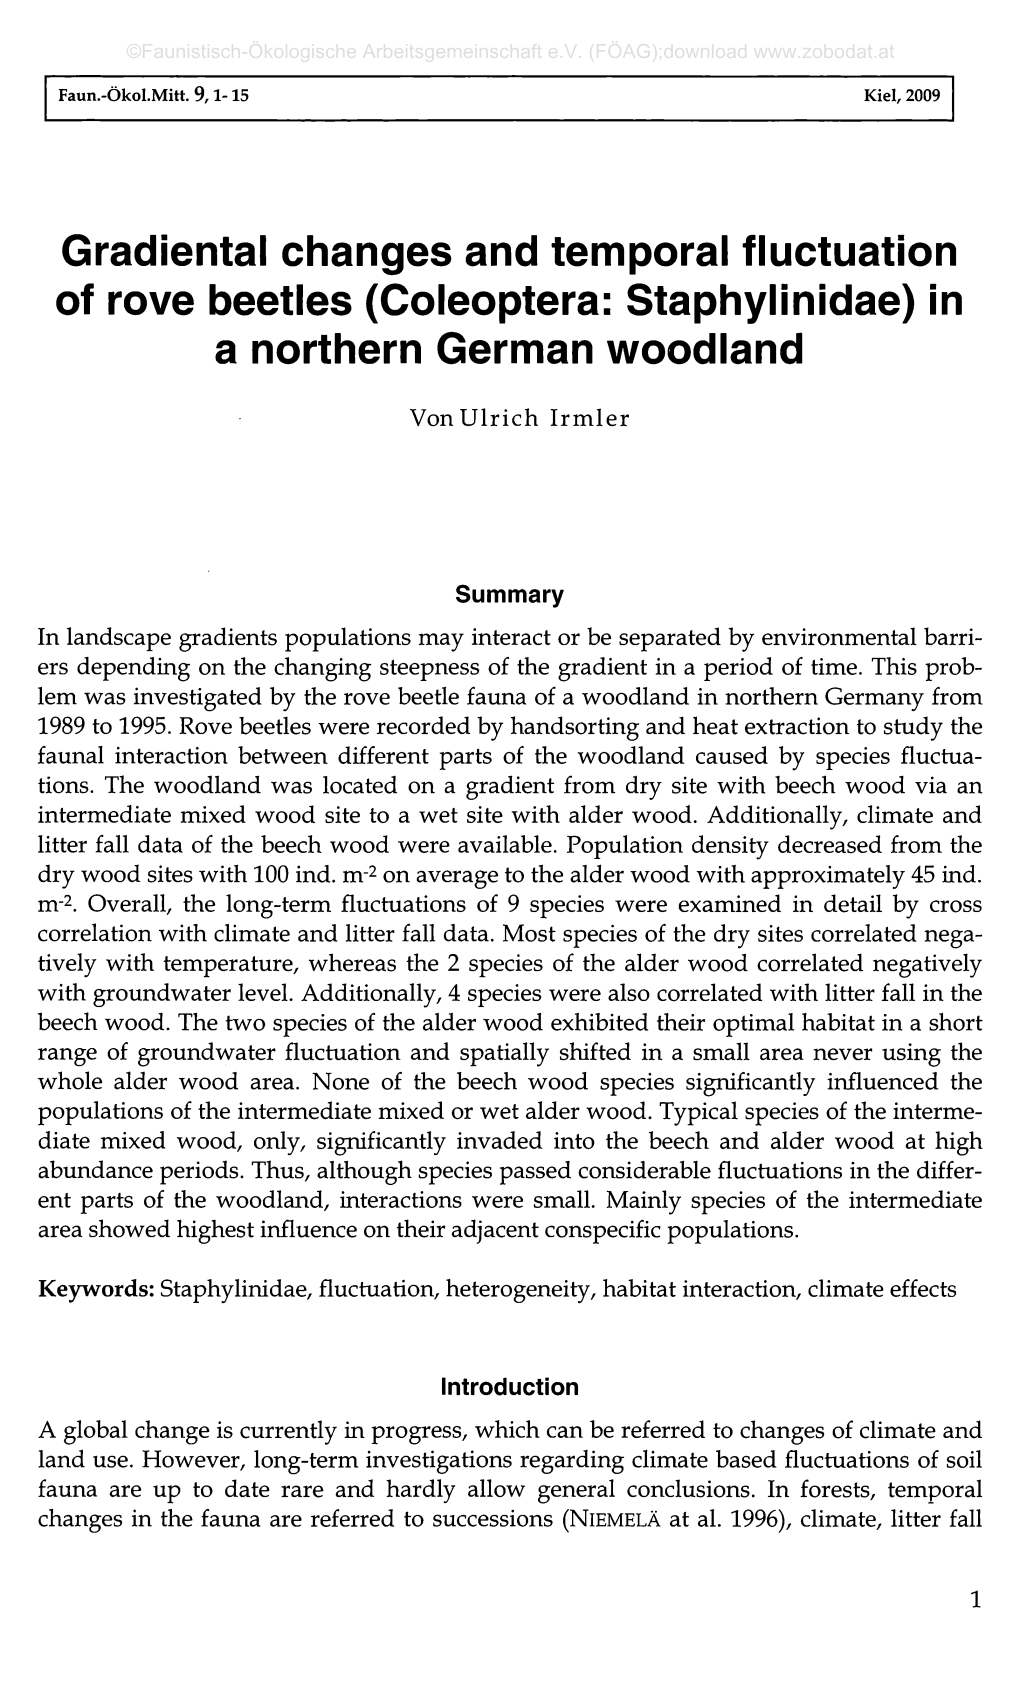 Gradiental Changes and Temporal Fluctuation of Rove Beetles (Coleoptera: Staphylinidae) in a Northern German Woodland